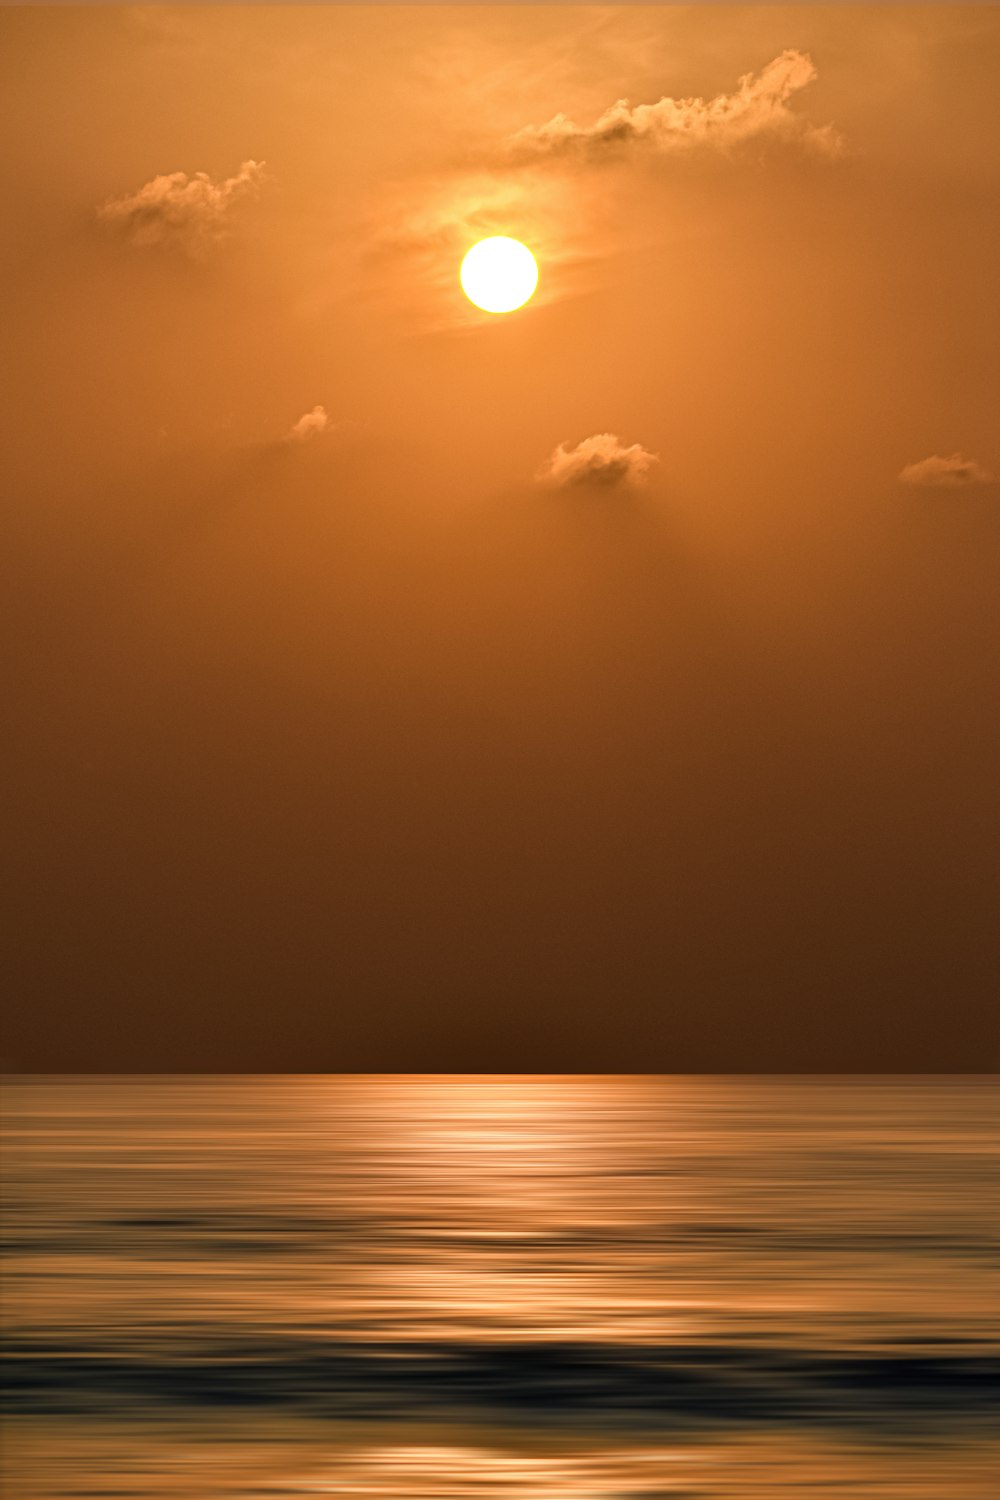 sun over the sea during sunset